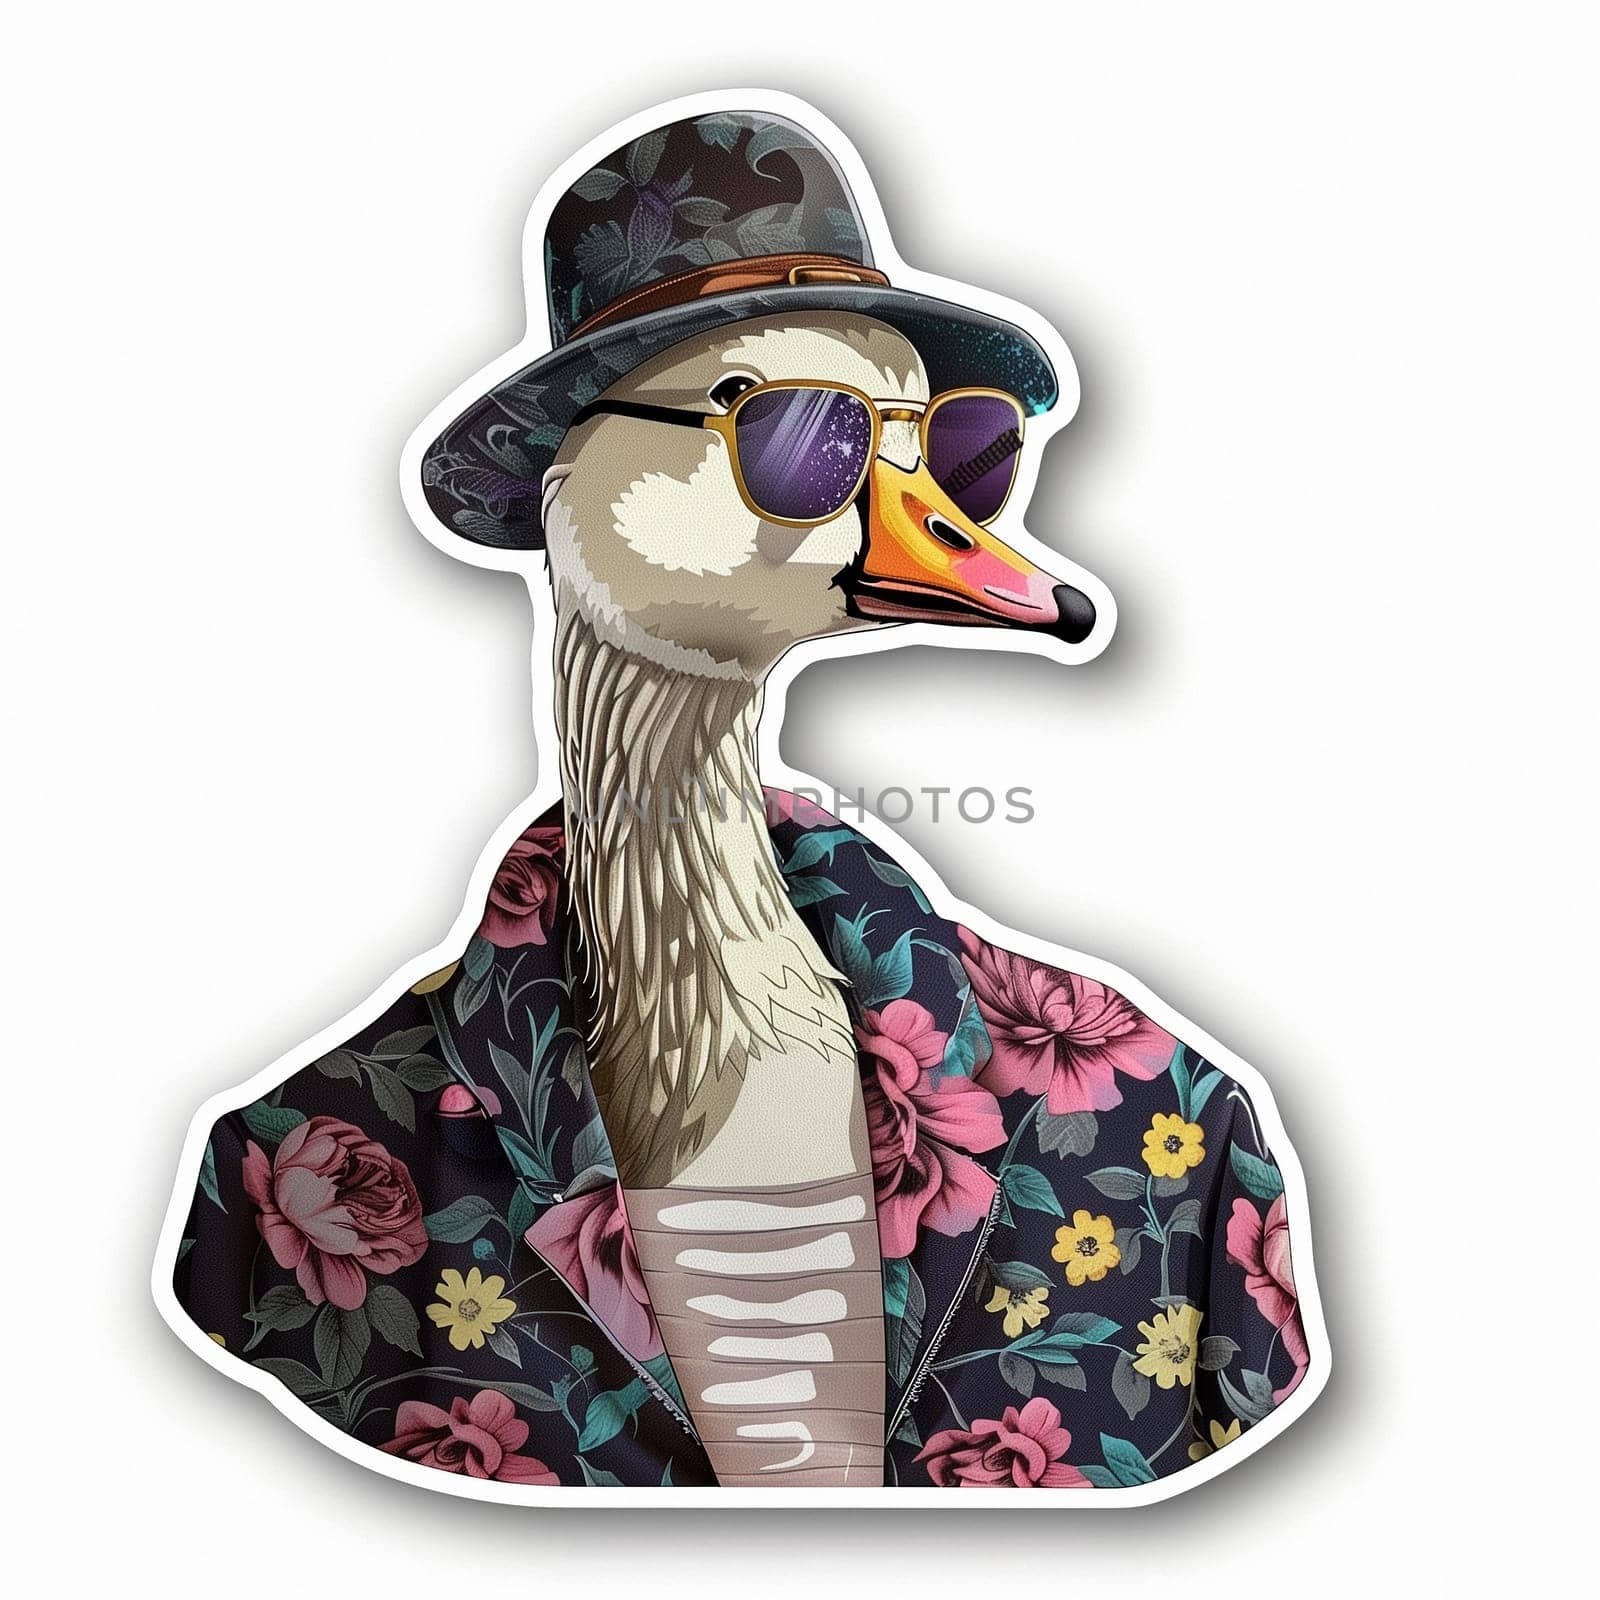 Sticker with a cool goose in glasses. High quality illustration